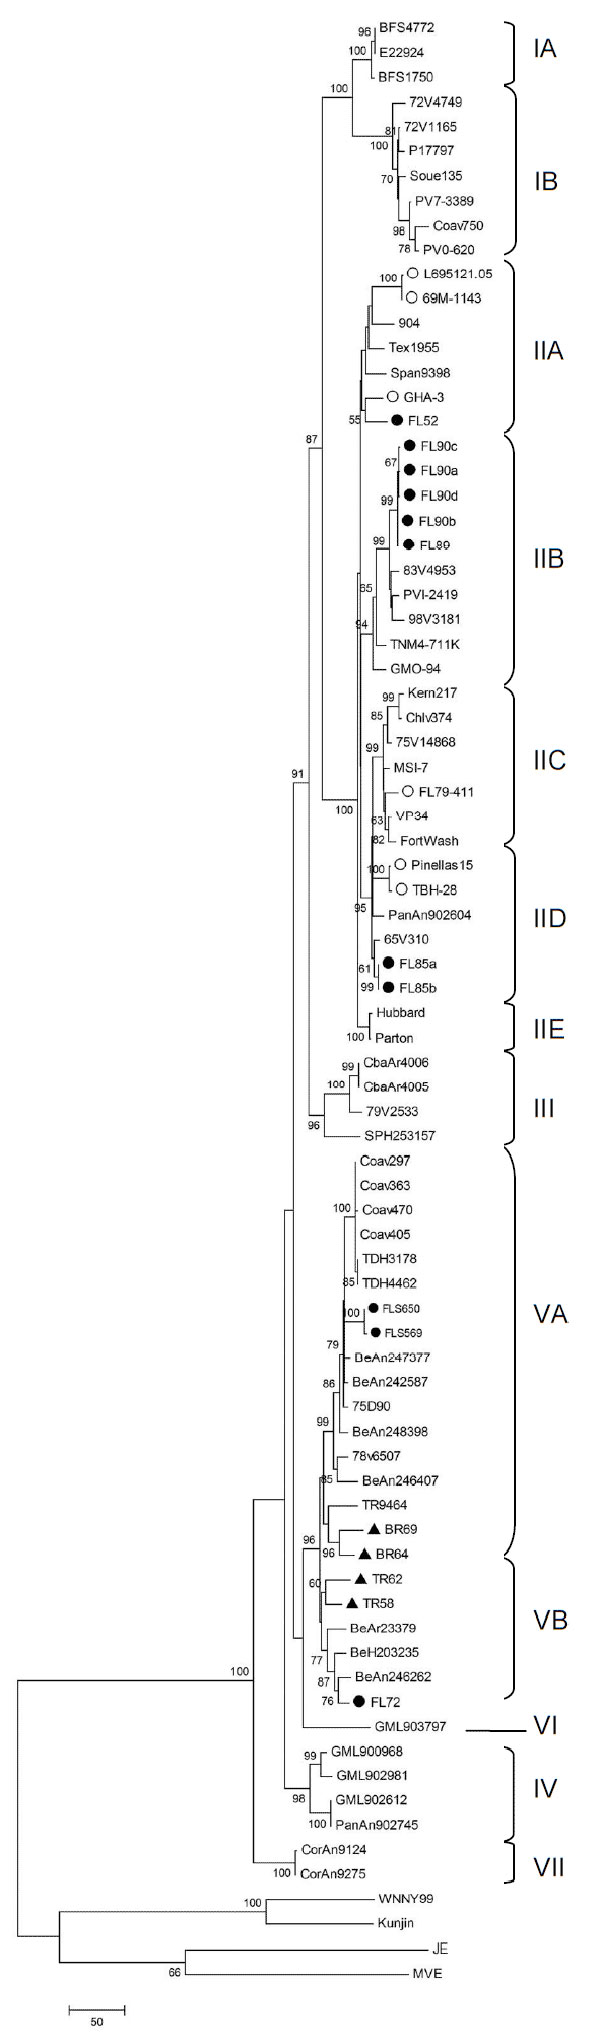 Phylogram of the complete envelope region of St. Louis encephalitis virus (SLEV) strains, inferred using the maximum parsimony method in MEGA4 software (14). Bootstrap analysis was performed using 1,000 replicates, and the consensus tree (generated by majority rule of 27 most parsimonious trees) was chosen. The number at each node indicates percent branch support by bootstrap sampling; values &lt;50 were collapsed. Branch lengths represent the amount of genetic divergence; the scale bar correspo